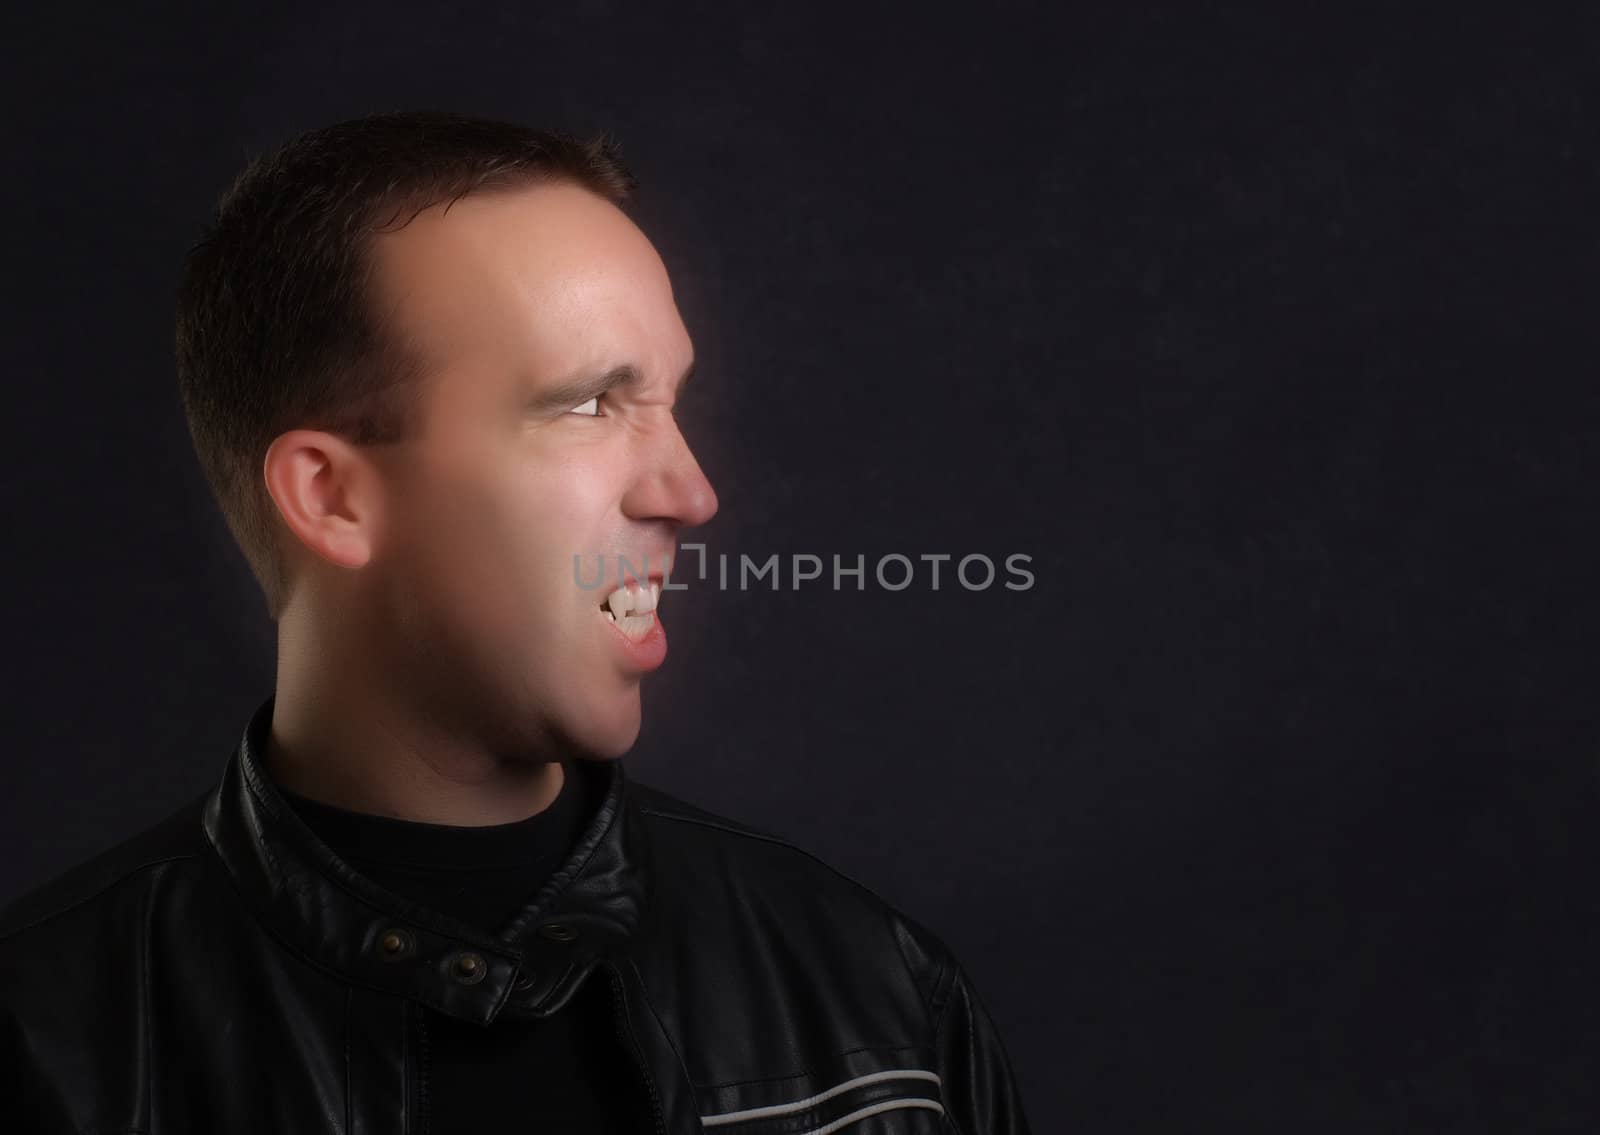 Profile view of a modern vampire wearing a leather jacket